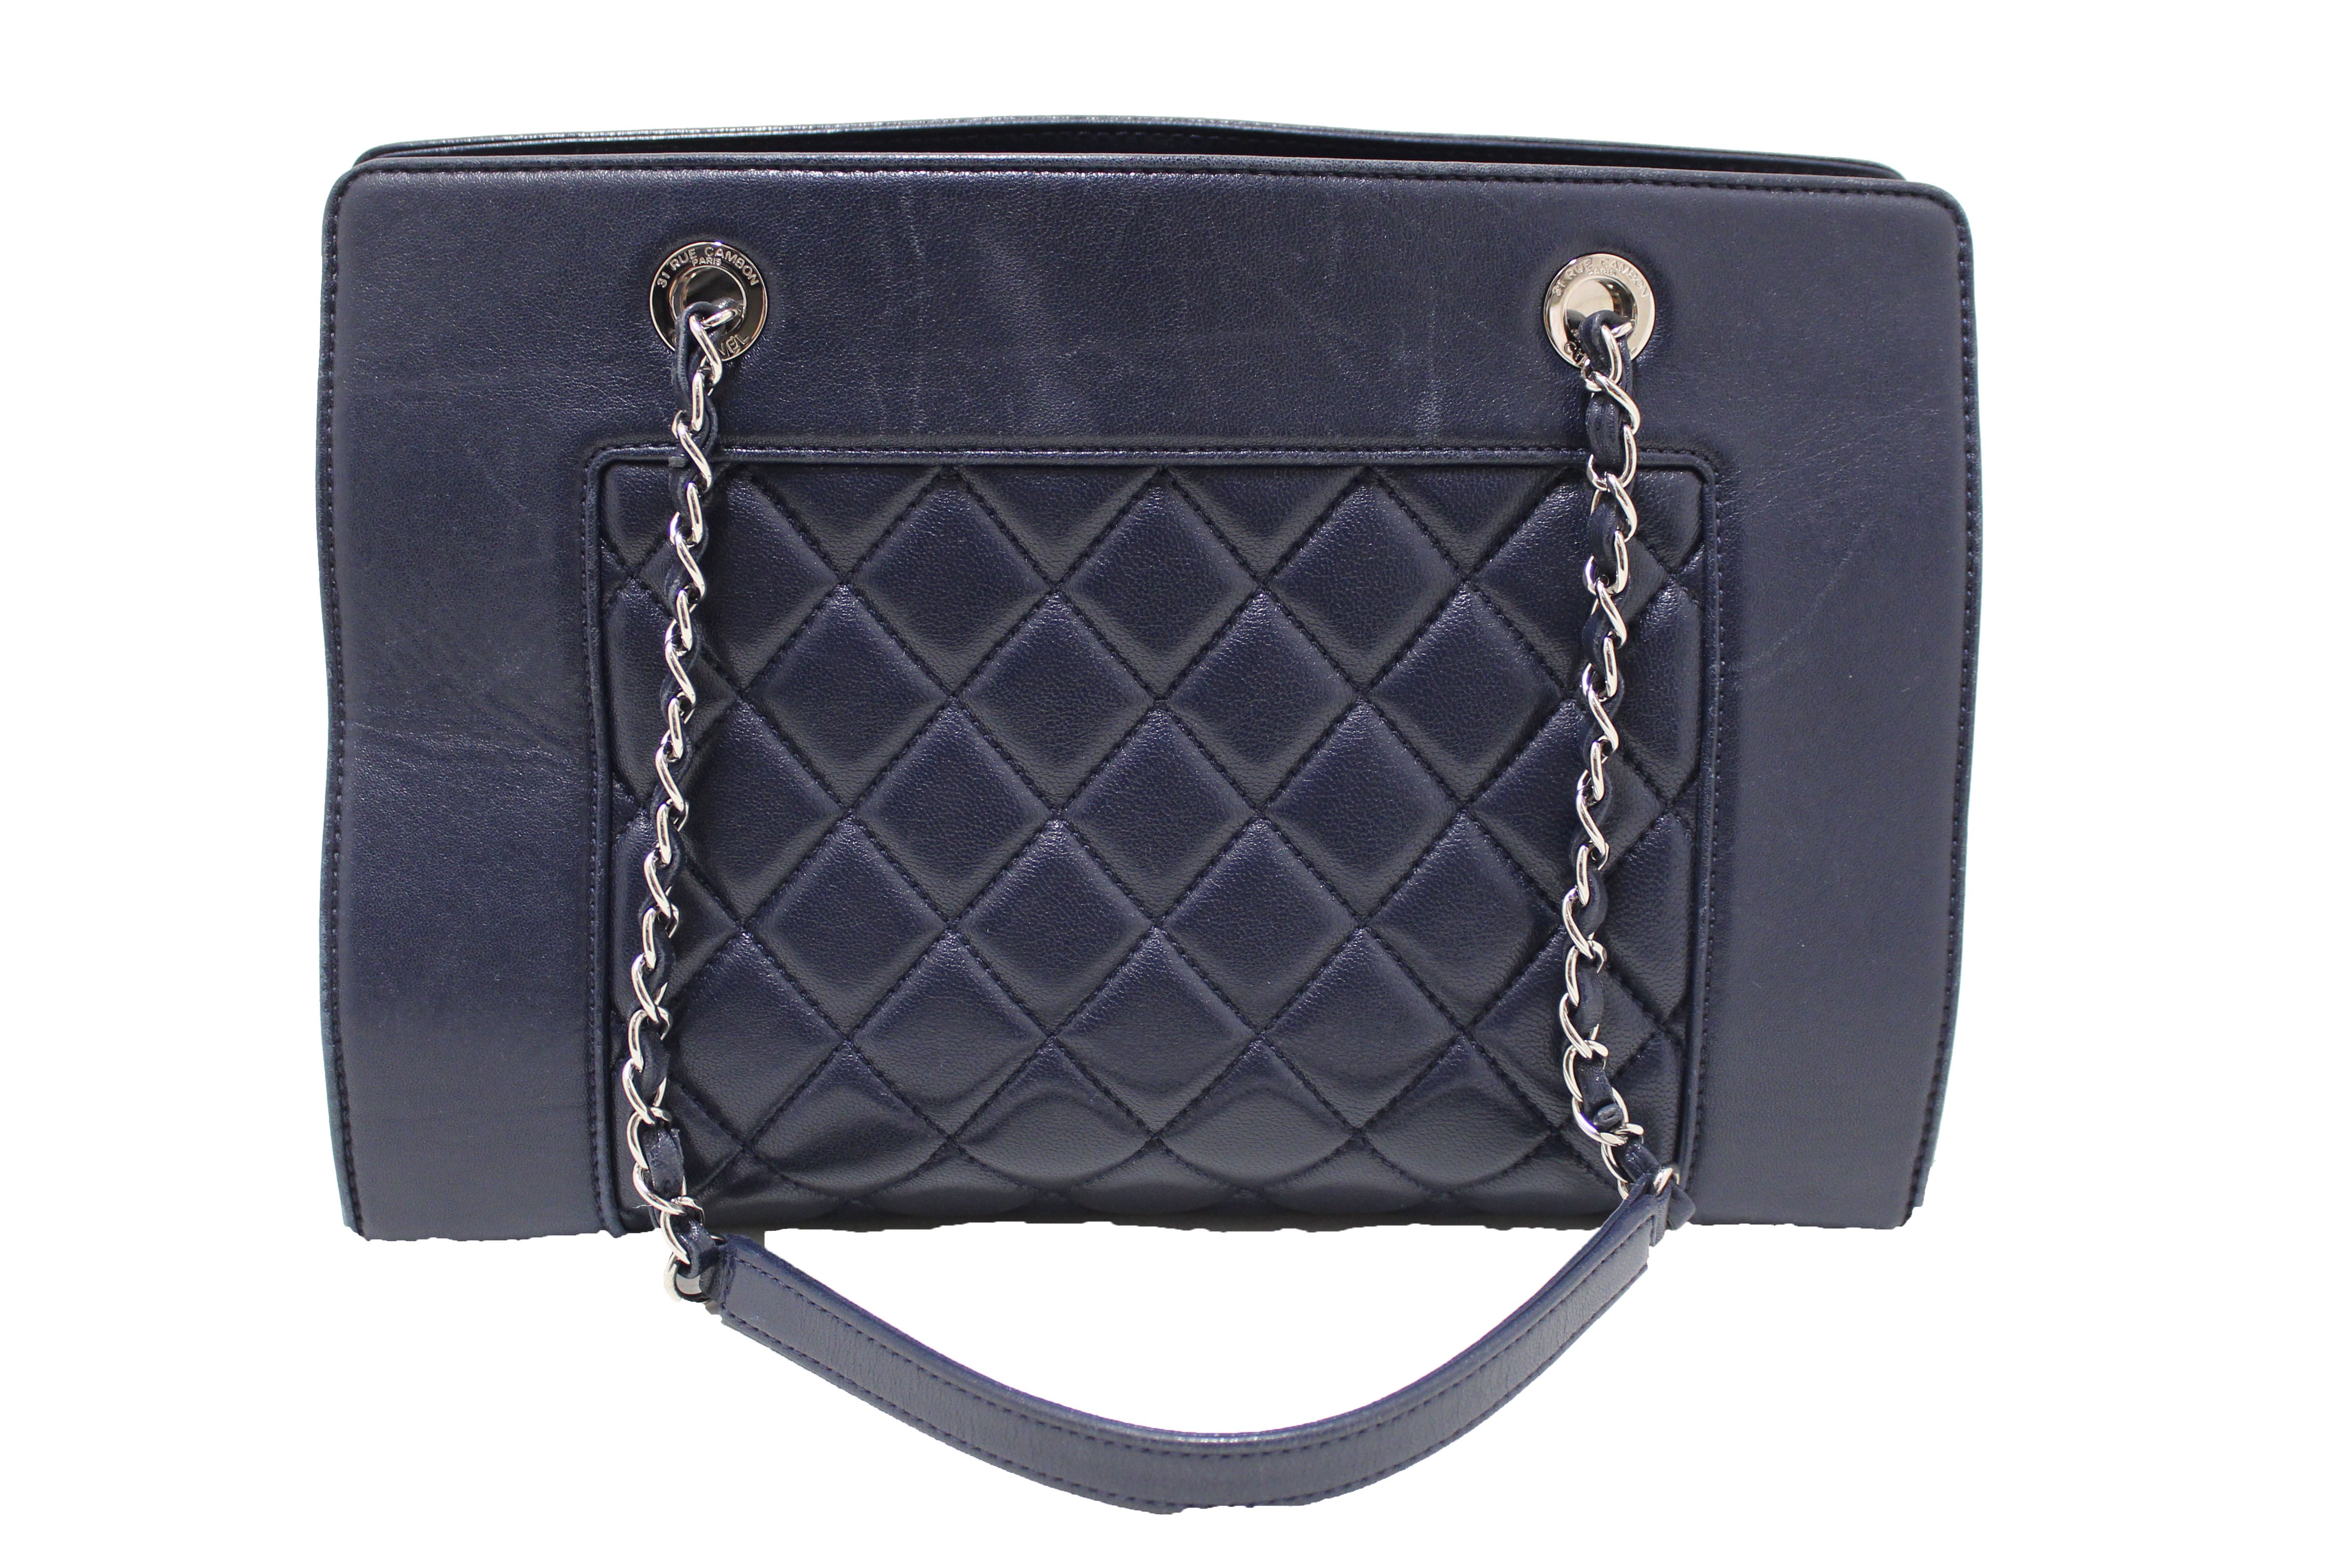 Authentic Chanel Quilted Blue Lambskin Leather Shopper Shoulder Tote Bag